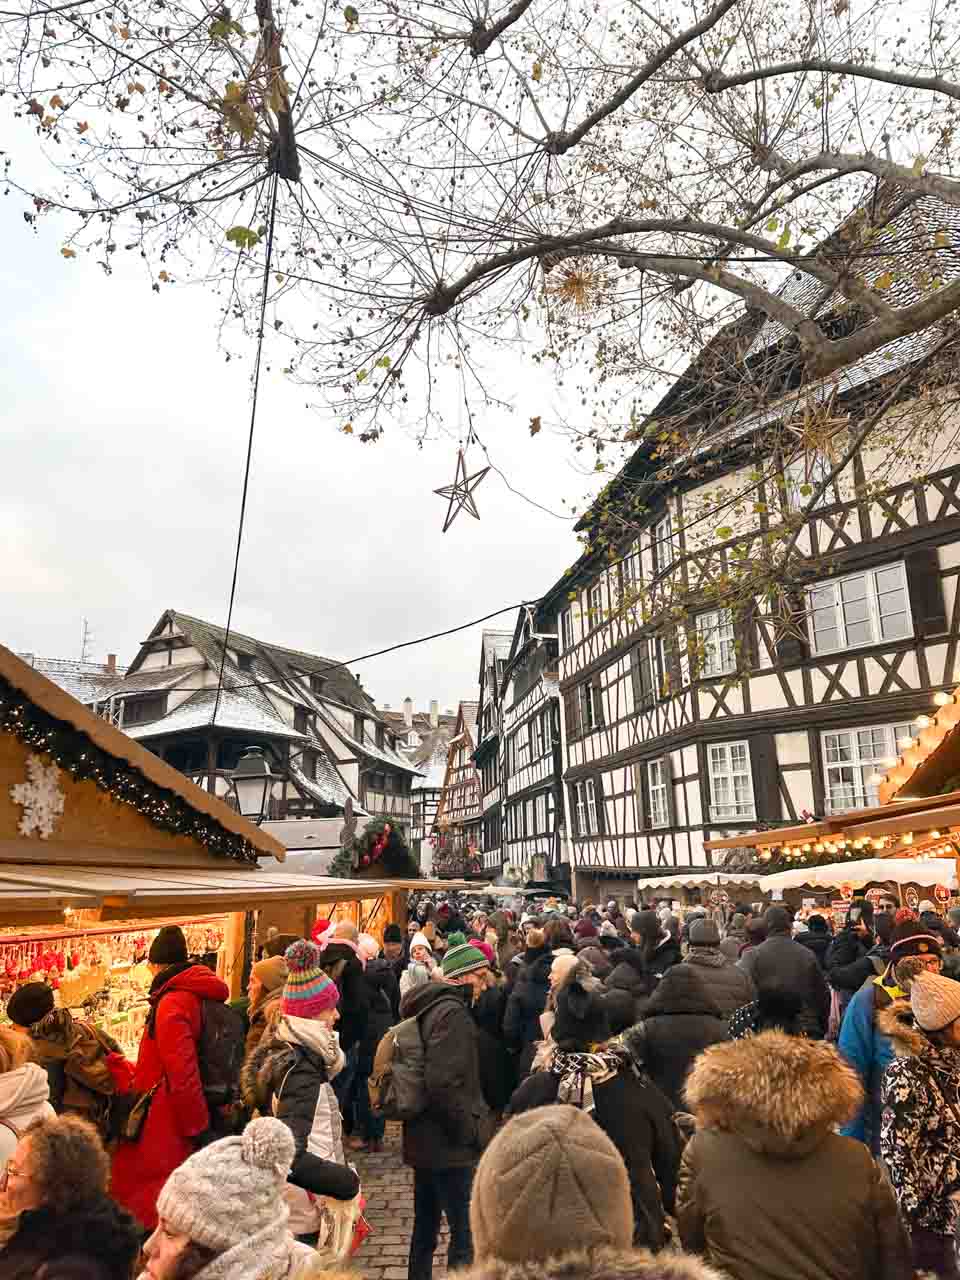 A bustling Christmas market scene in Strasbourg, with crowds of people shopping and enjoying the ambiance in front of historic half-timbered houses